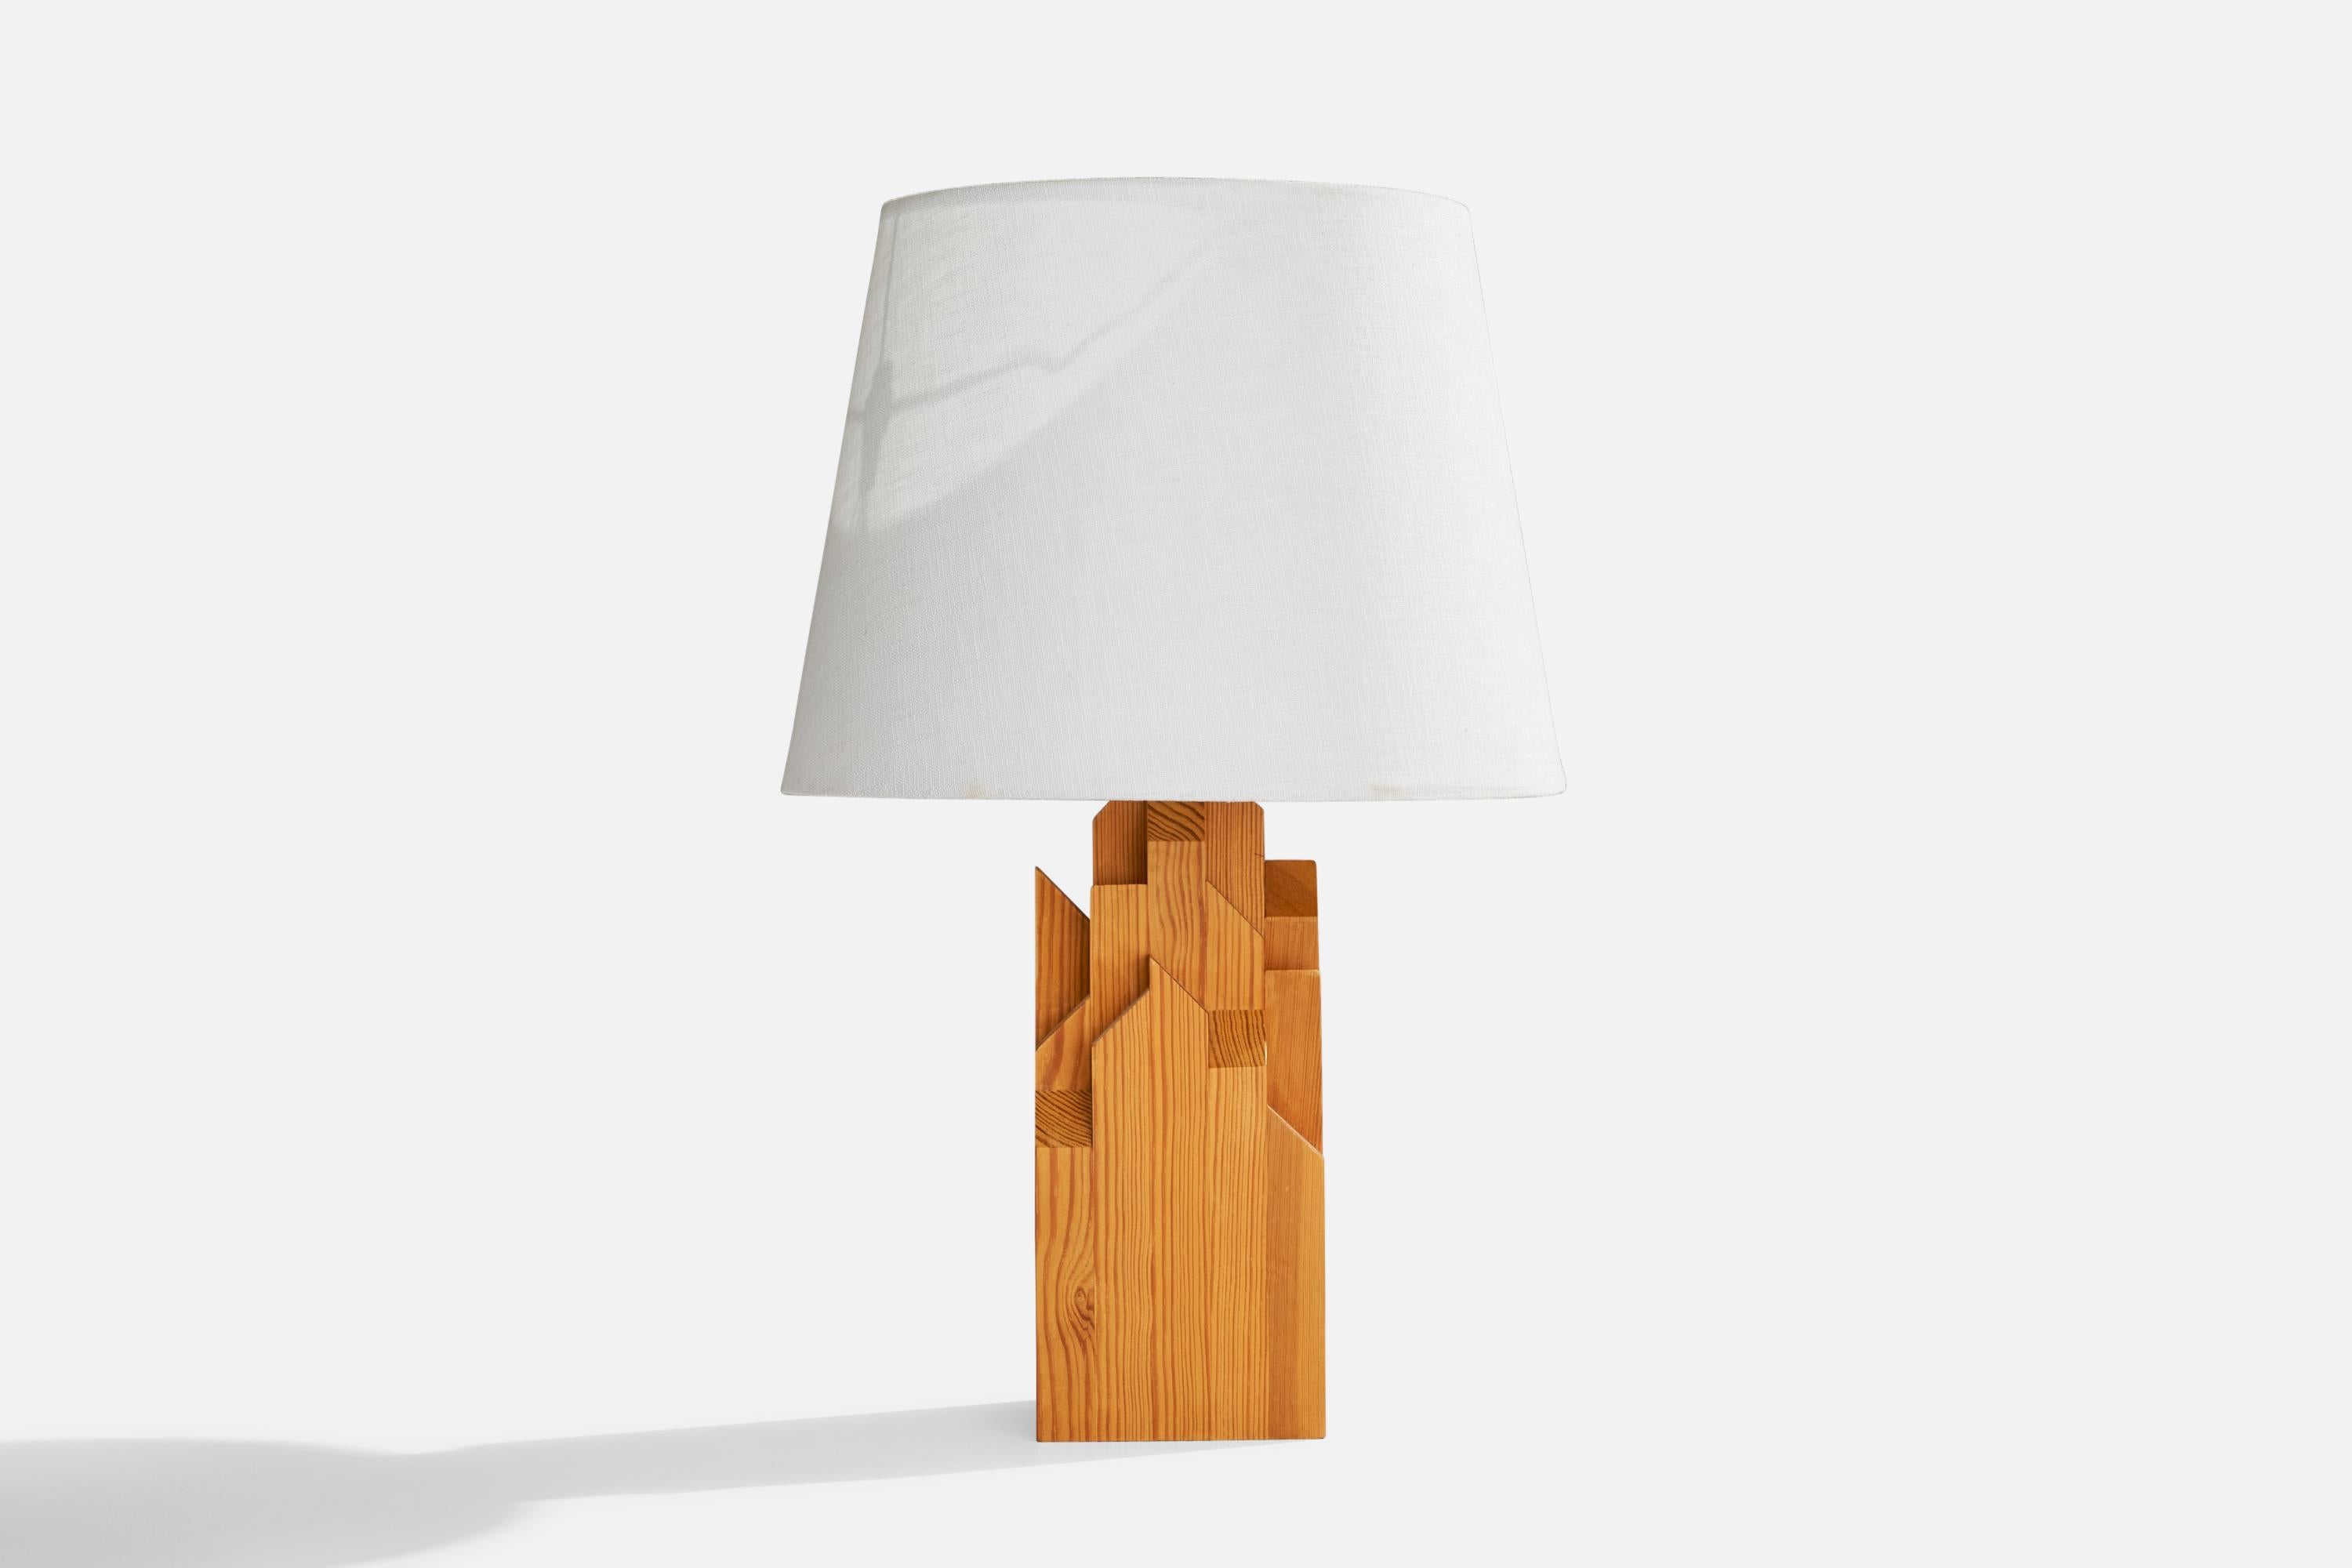 A pine table lamp designed and produced in Sweden, 1970s.

Dimensions of Lamp (inches): 13.25” H x 4.25” Diameter
Dimensions of Shade (inches): 9” Top Diameter x 12” Bottom Diameter x 9” H
Dimensions of Lamp with Shade (inches): 18.75”  H x